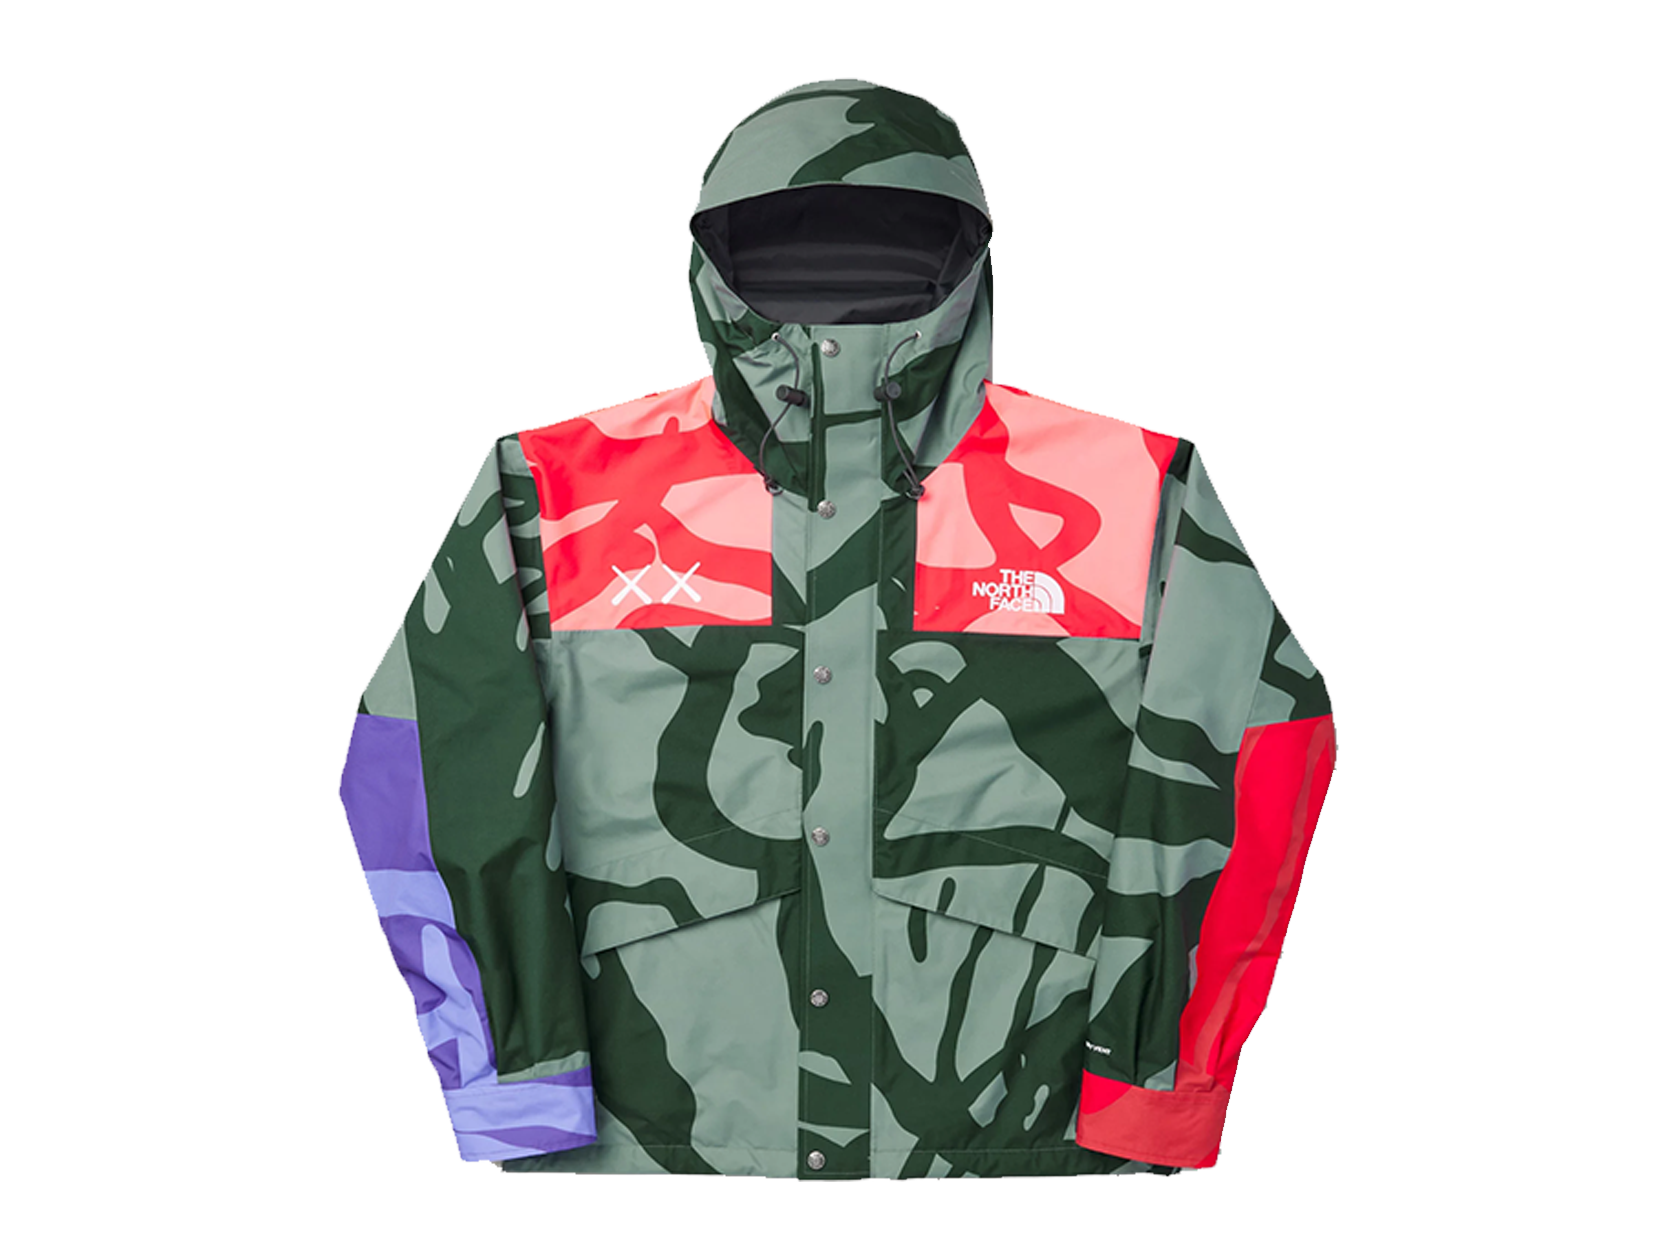 Double Boxed hoodie 429.99 KAWS x The North Face Retro 1986 Mountain Jacket Balsam Green Double Boxed